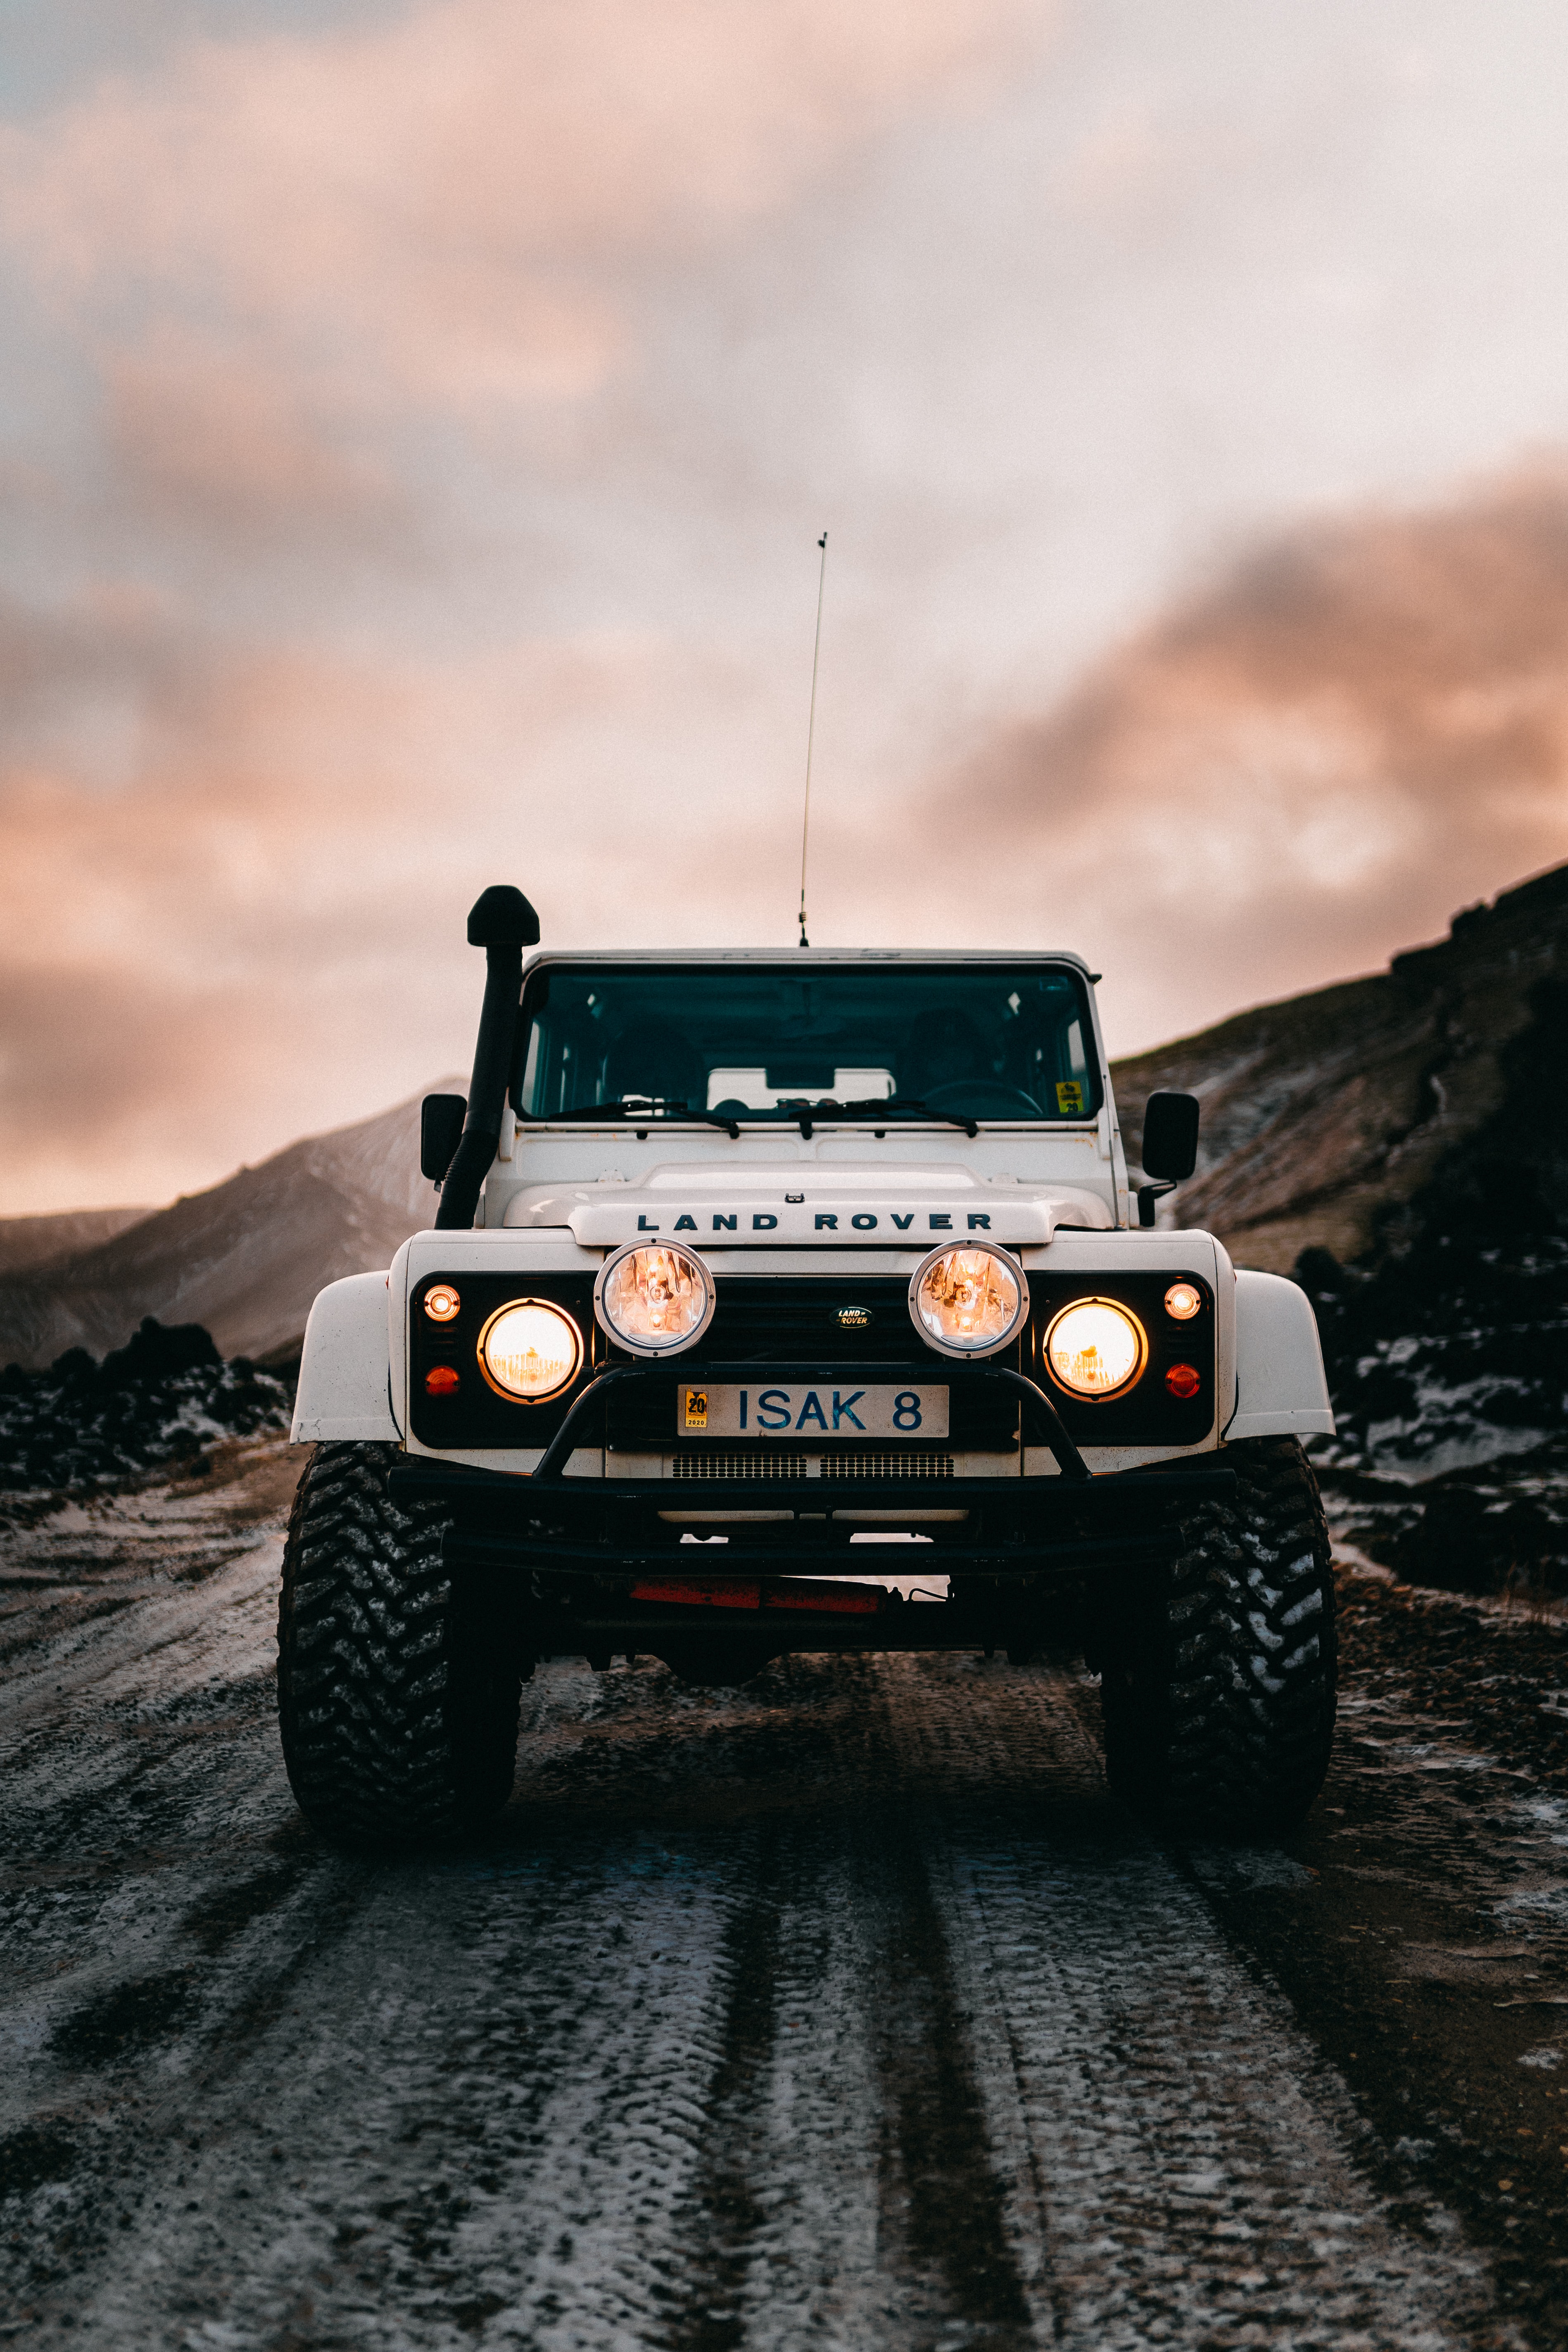 land rover, cars, lights, front view, white, car, machine, headlights